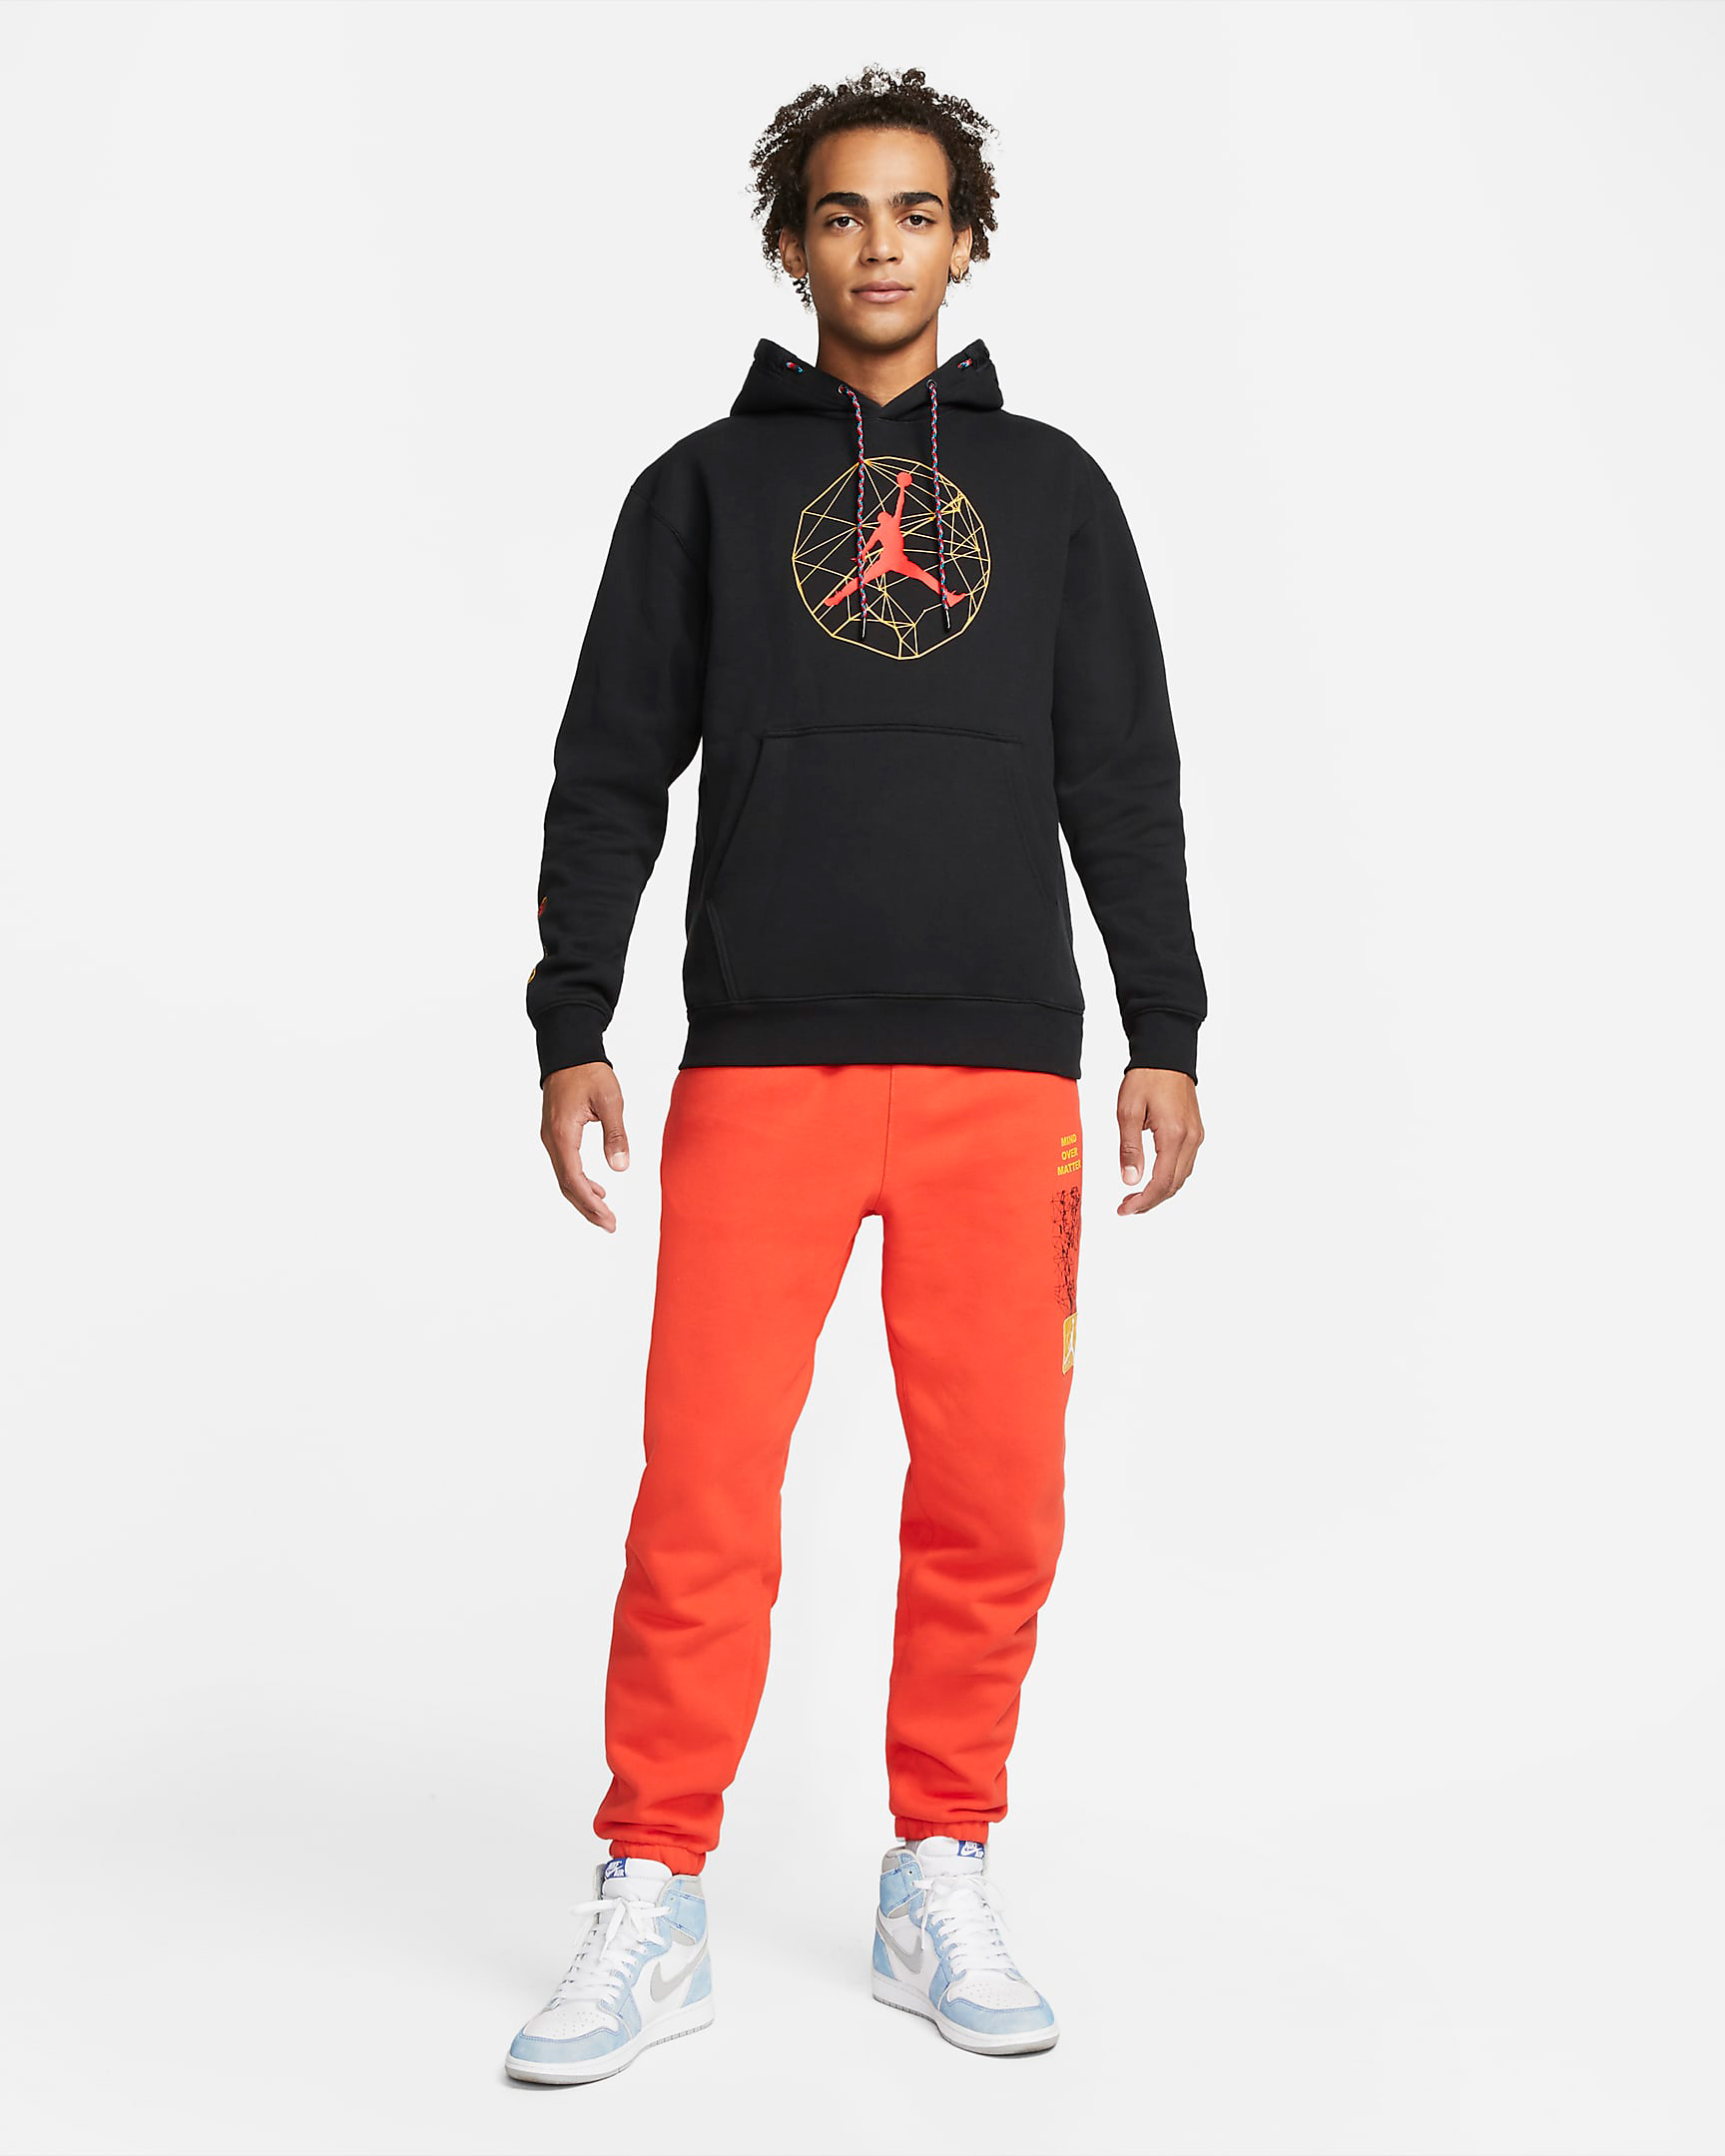 jordan-essentials-mountainside-hoodie-black-chile-red-pants-outfit